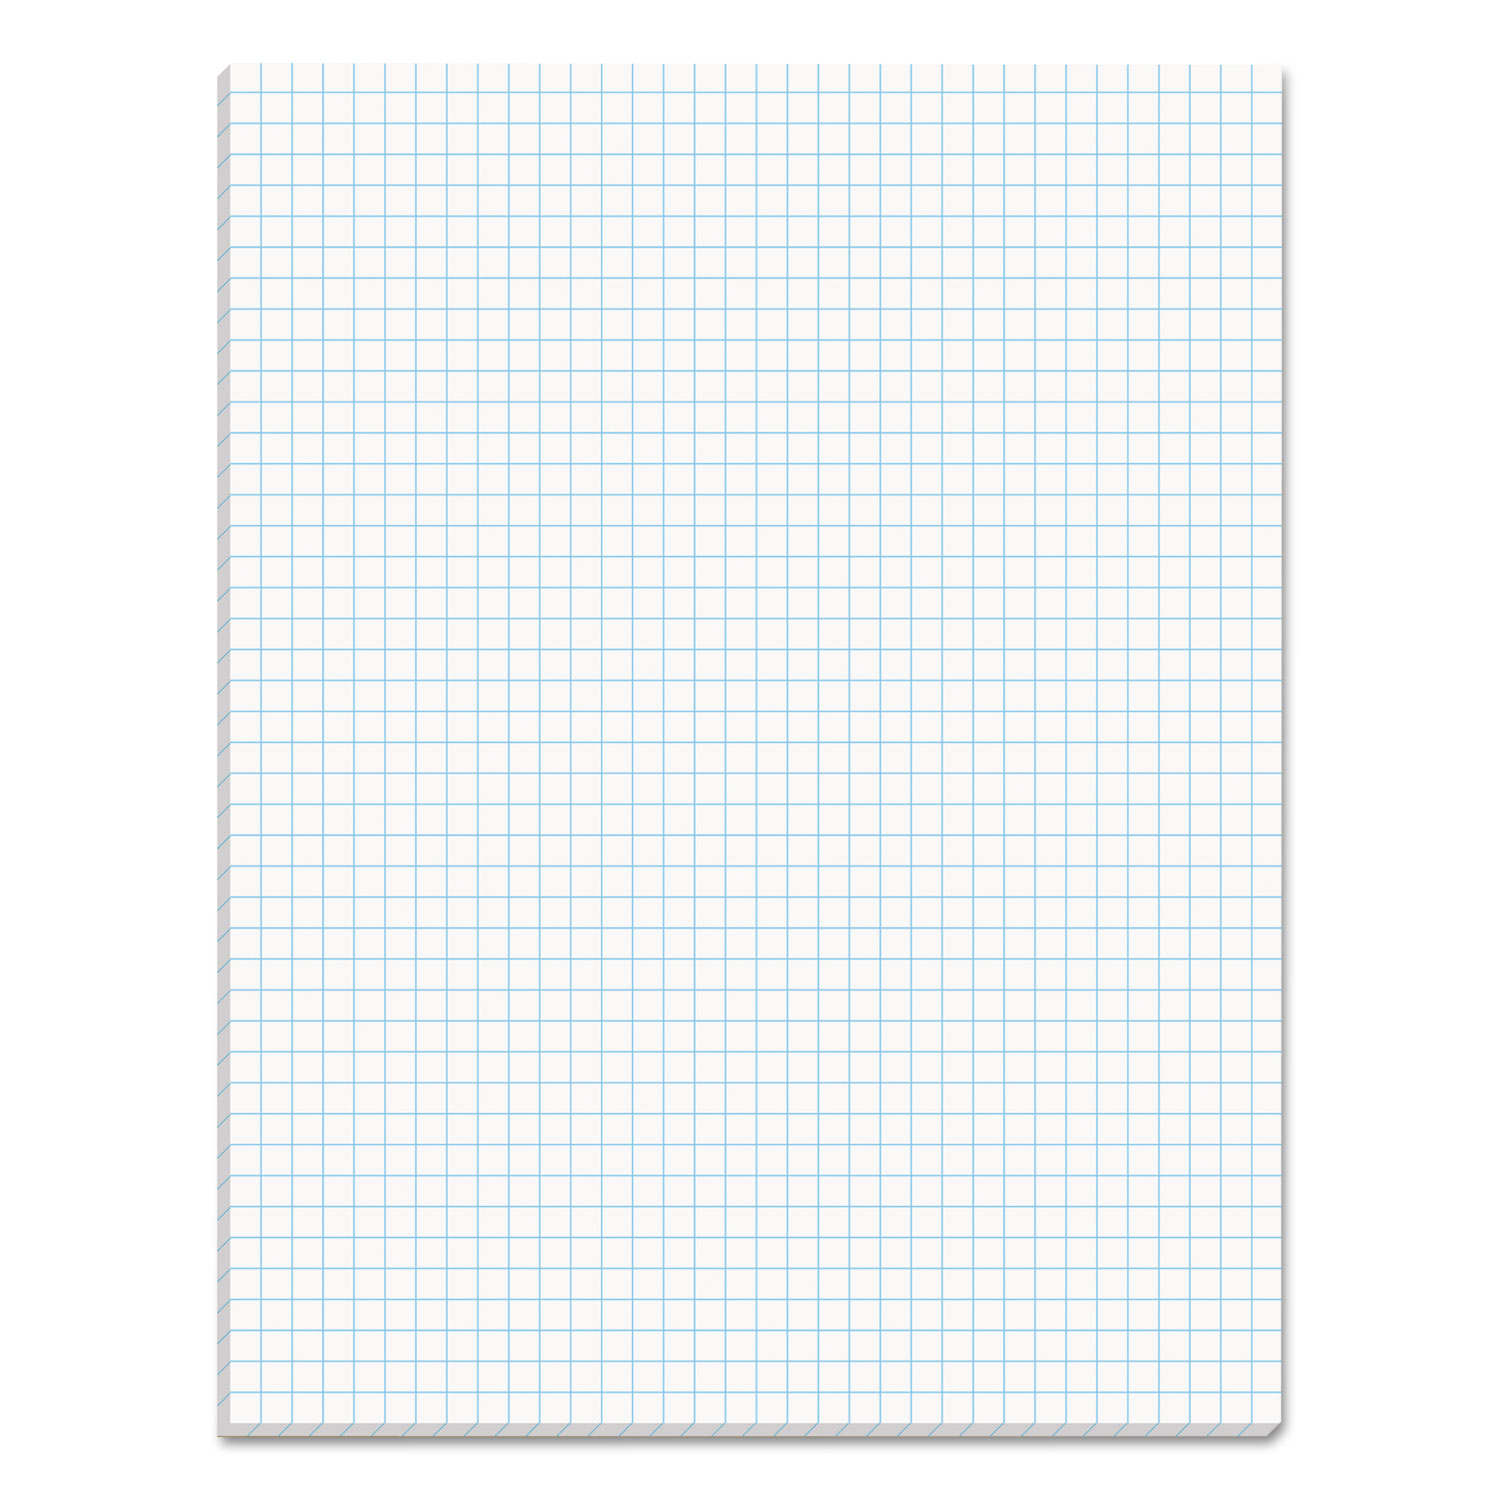  TOPS 33041 Quadrille Pads, 4 sq/in Quadrille Rule, 8.5 x 11, White, 50 Sheets (TOP33041) 